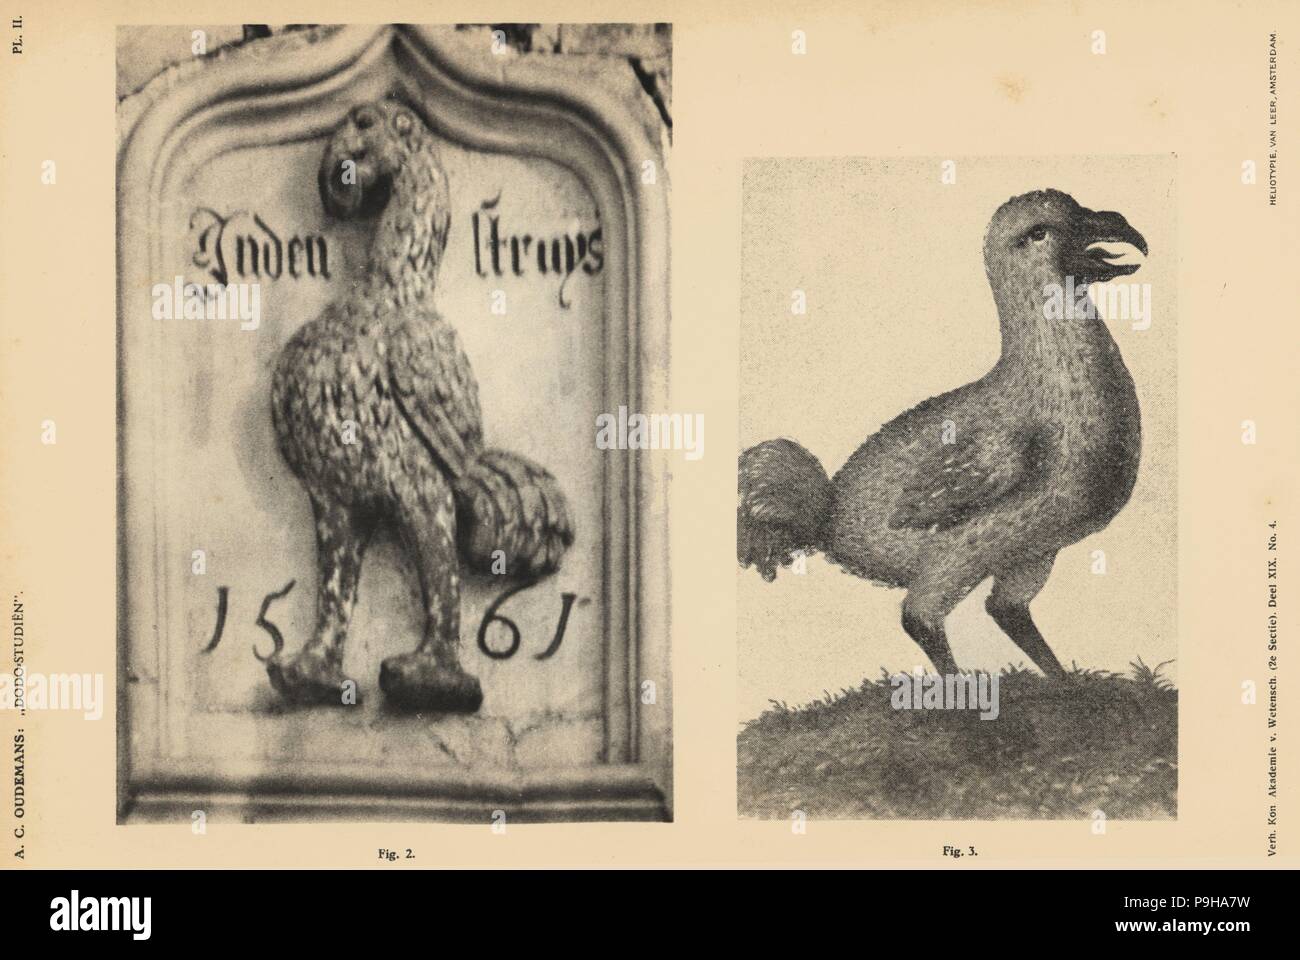 Dodo of the Scotch House, Veere, 1561, and dodo from the Florence Codex, circa 1703. Heliotype by Van Leer from Dr. Anthonie Cornelis Oudemans' Dodo Studies, Amsterdam, Johannes Muller, 1917. Stock Photo